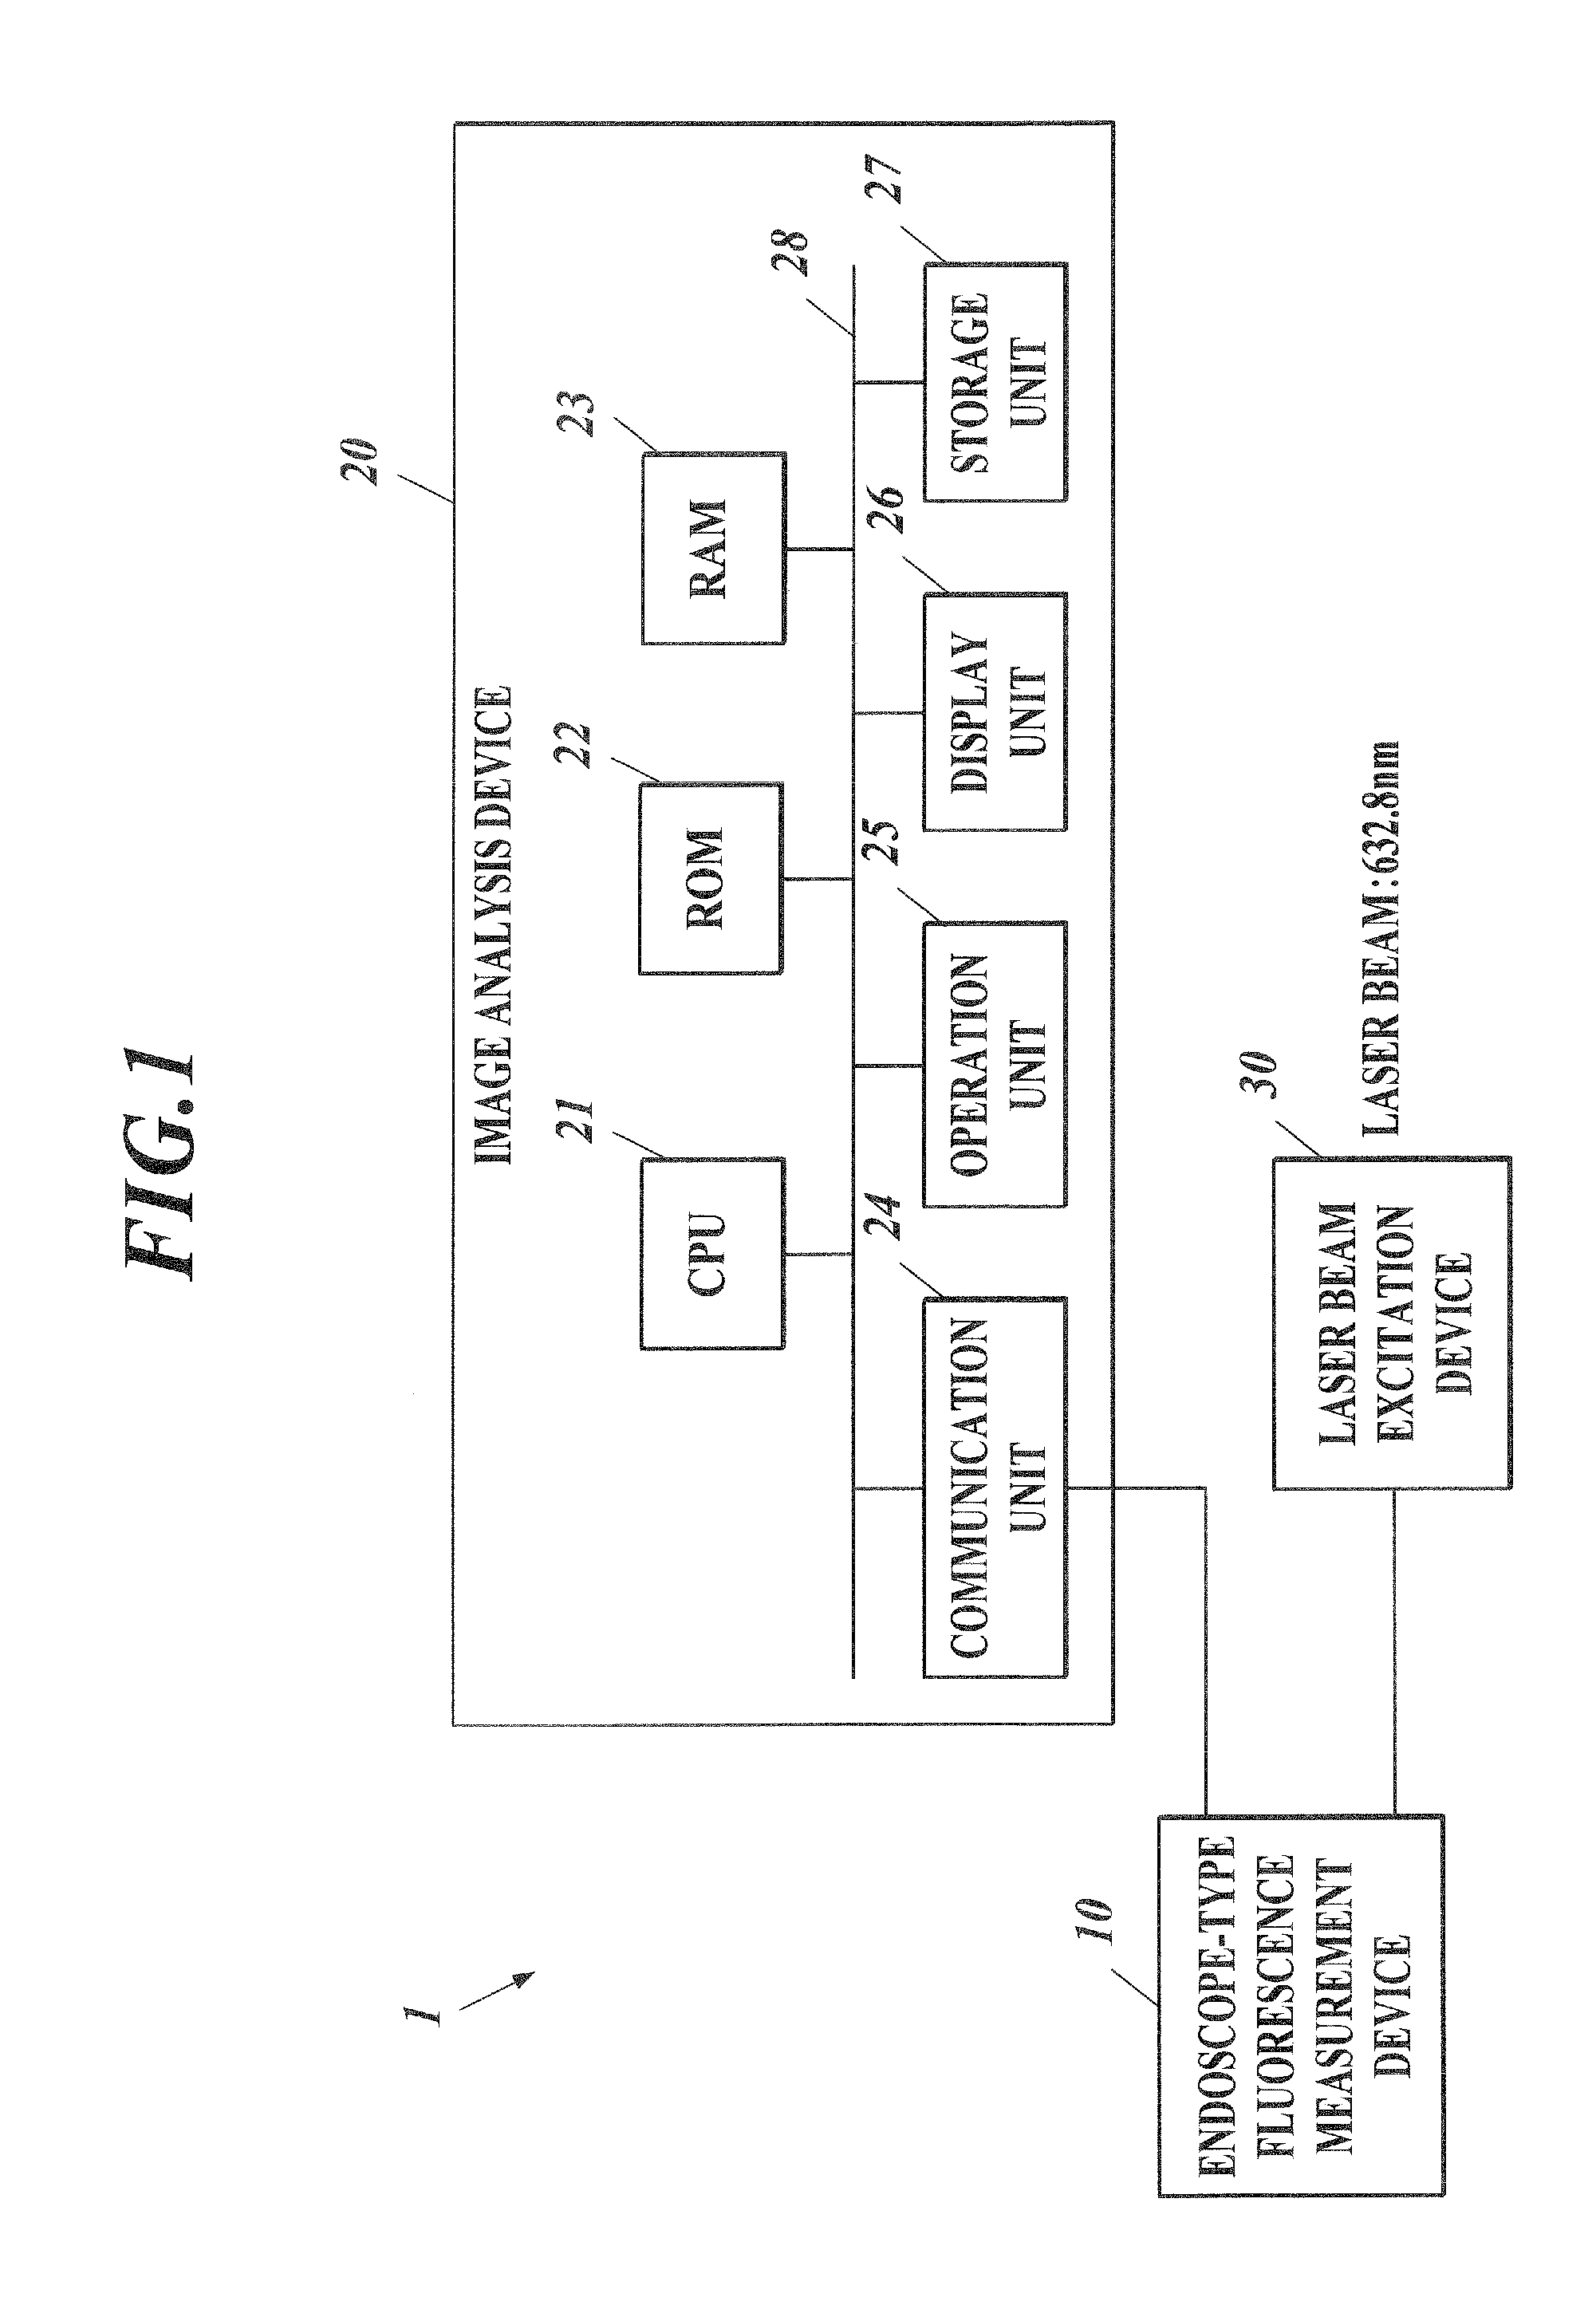 Method for detecting afferent lymph vessel inflow regions and method for identifying specific cells